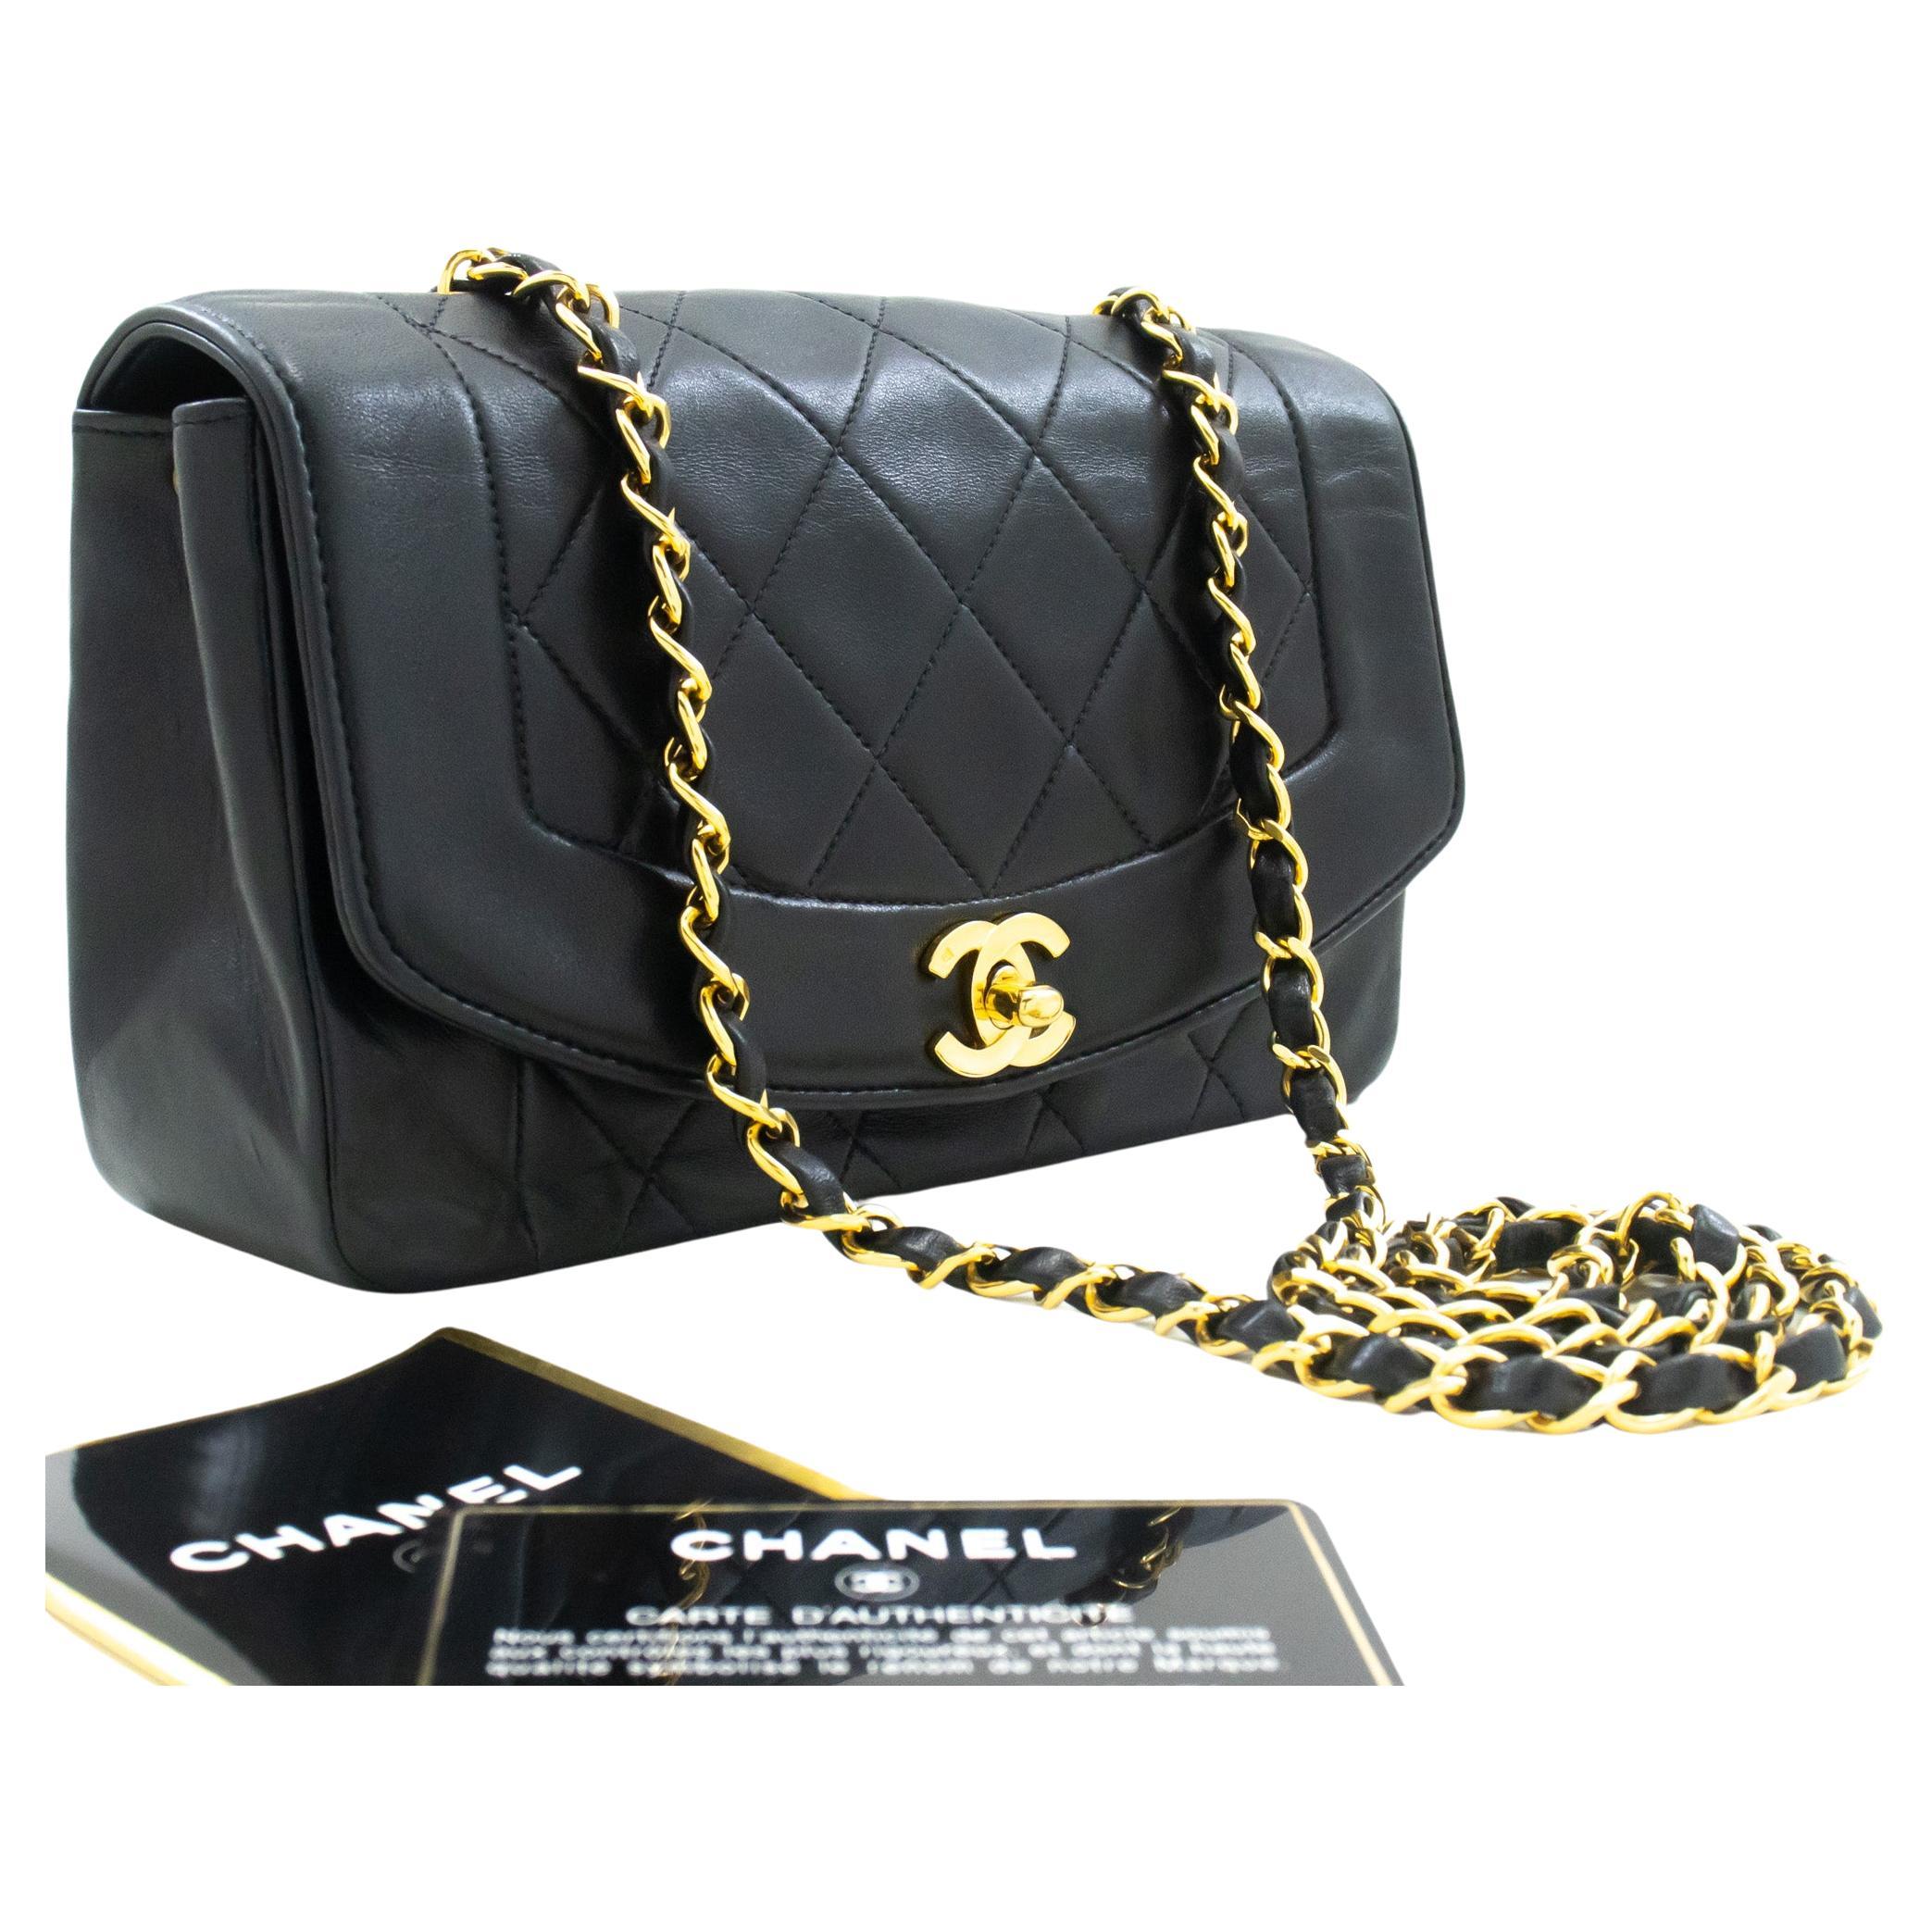 What are the different types of the Chanel Classic Flap Bags?